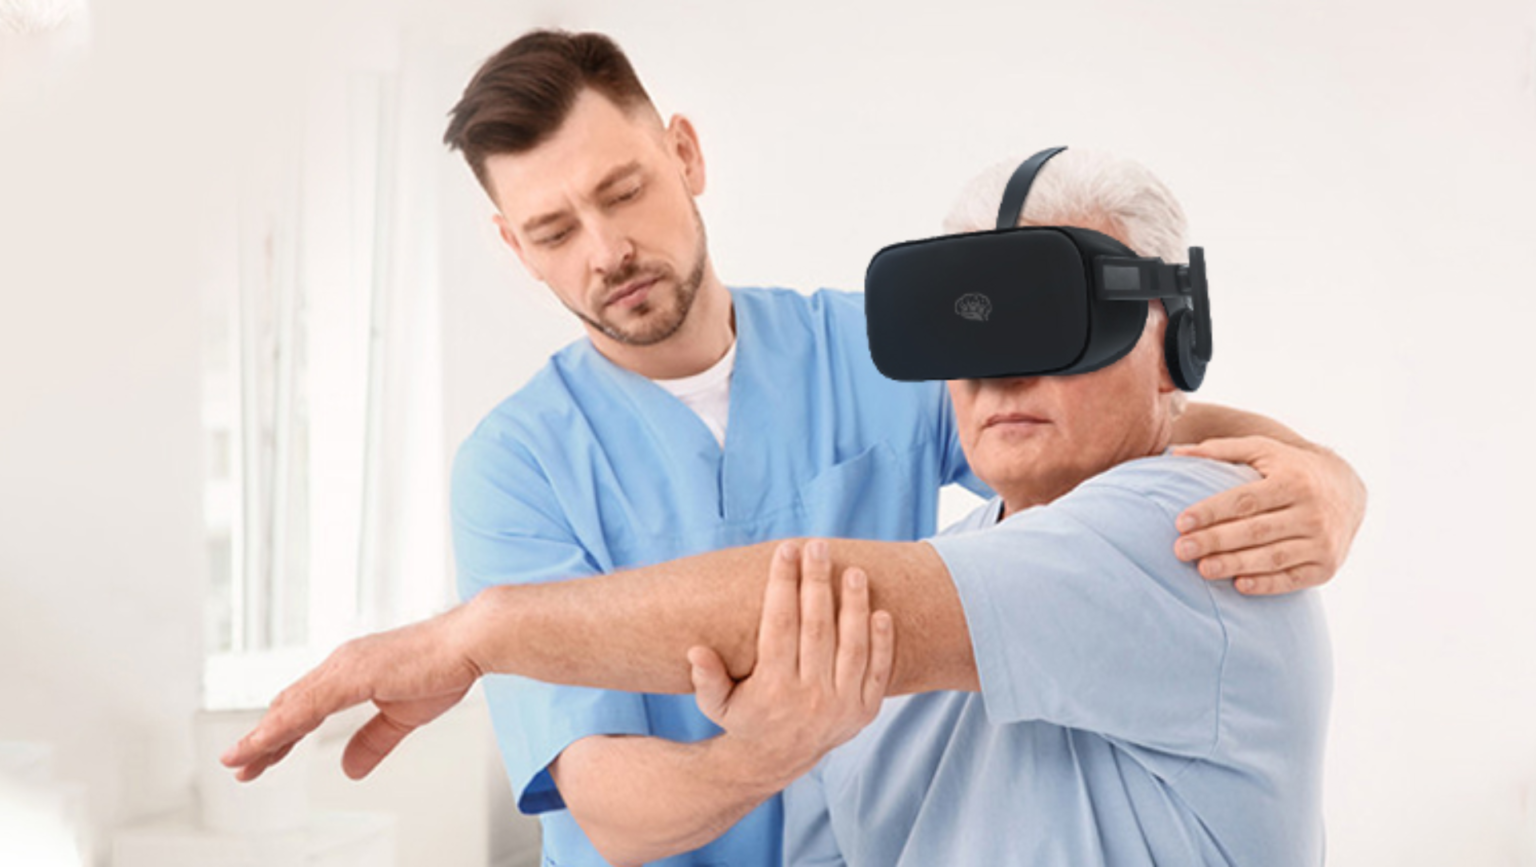 Mind-Controlled VR Games: A innovation in Stroke Rehabilitation?